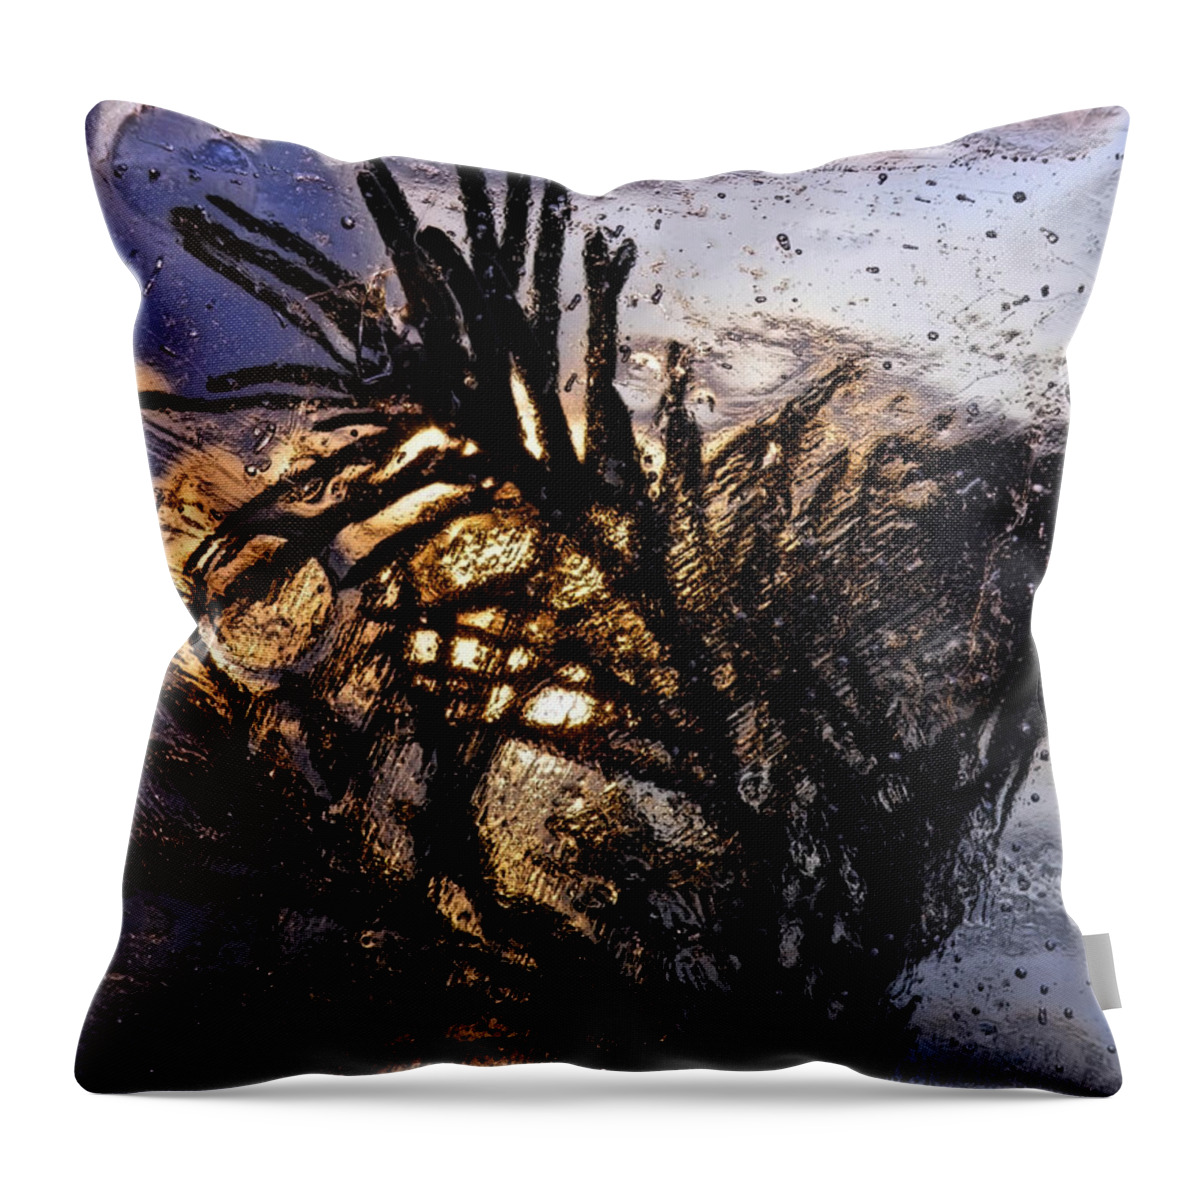 Ice Throw Pillow featuring the photograph Evening Plant by Sami Tiainen